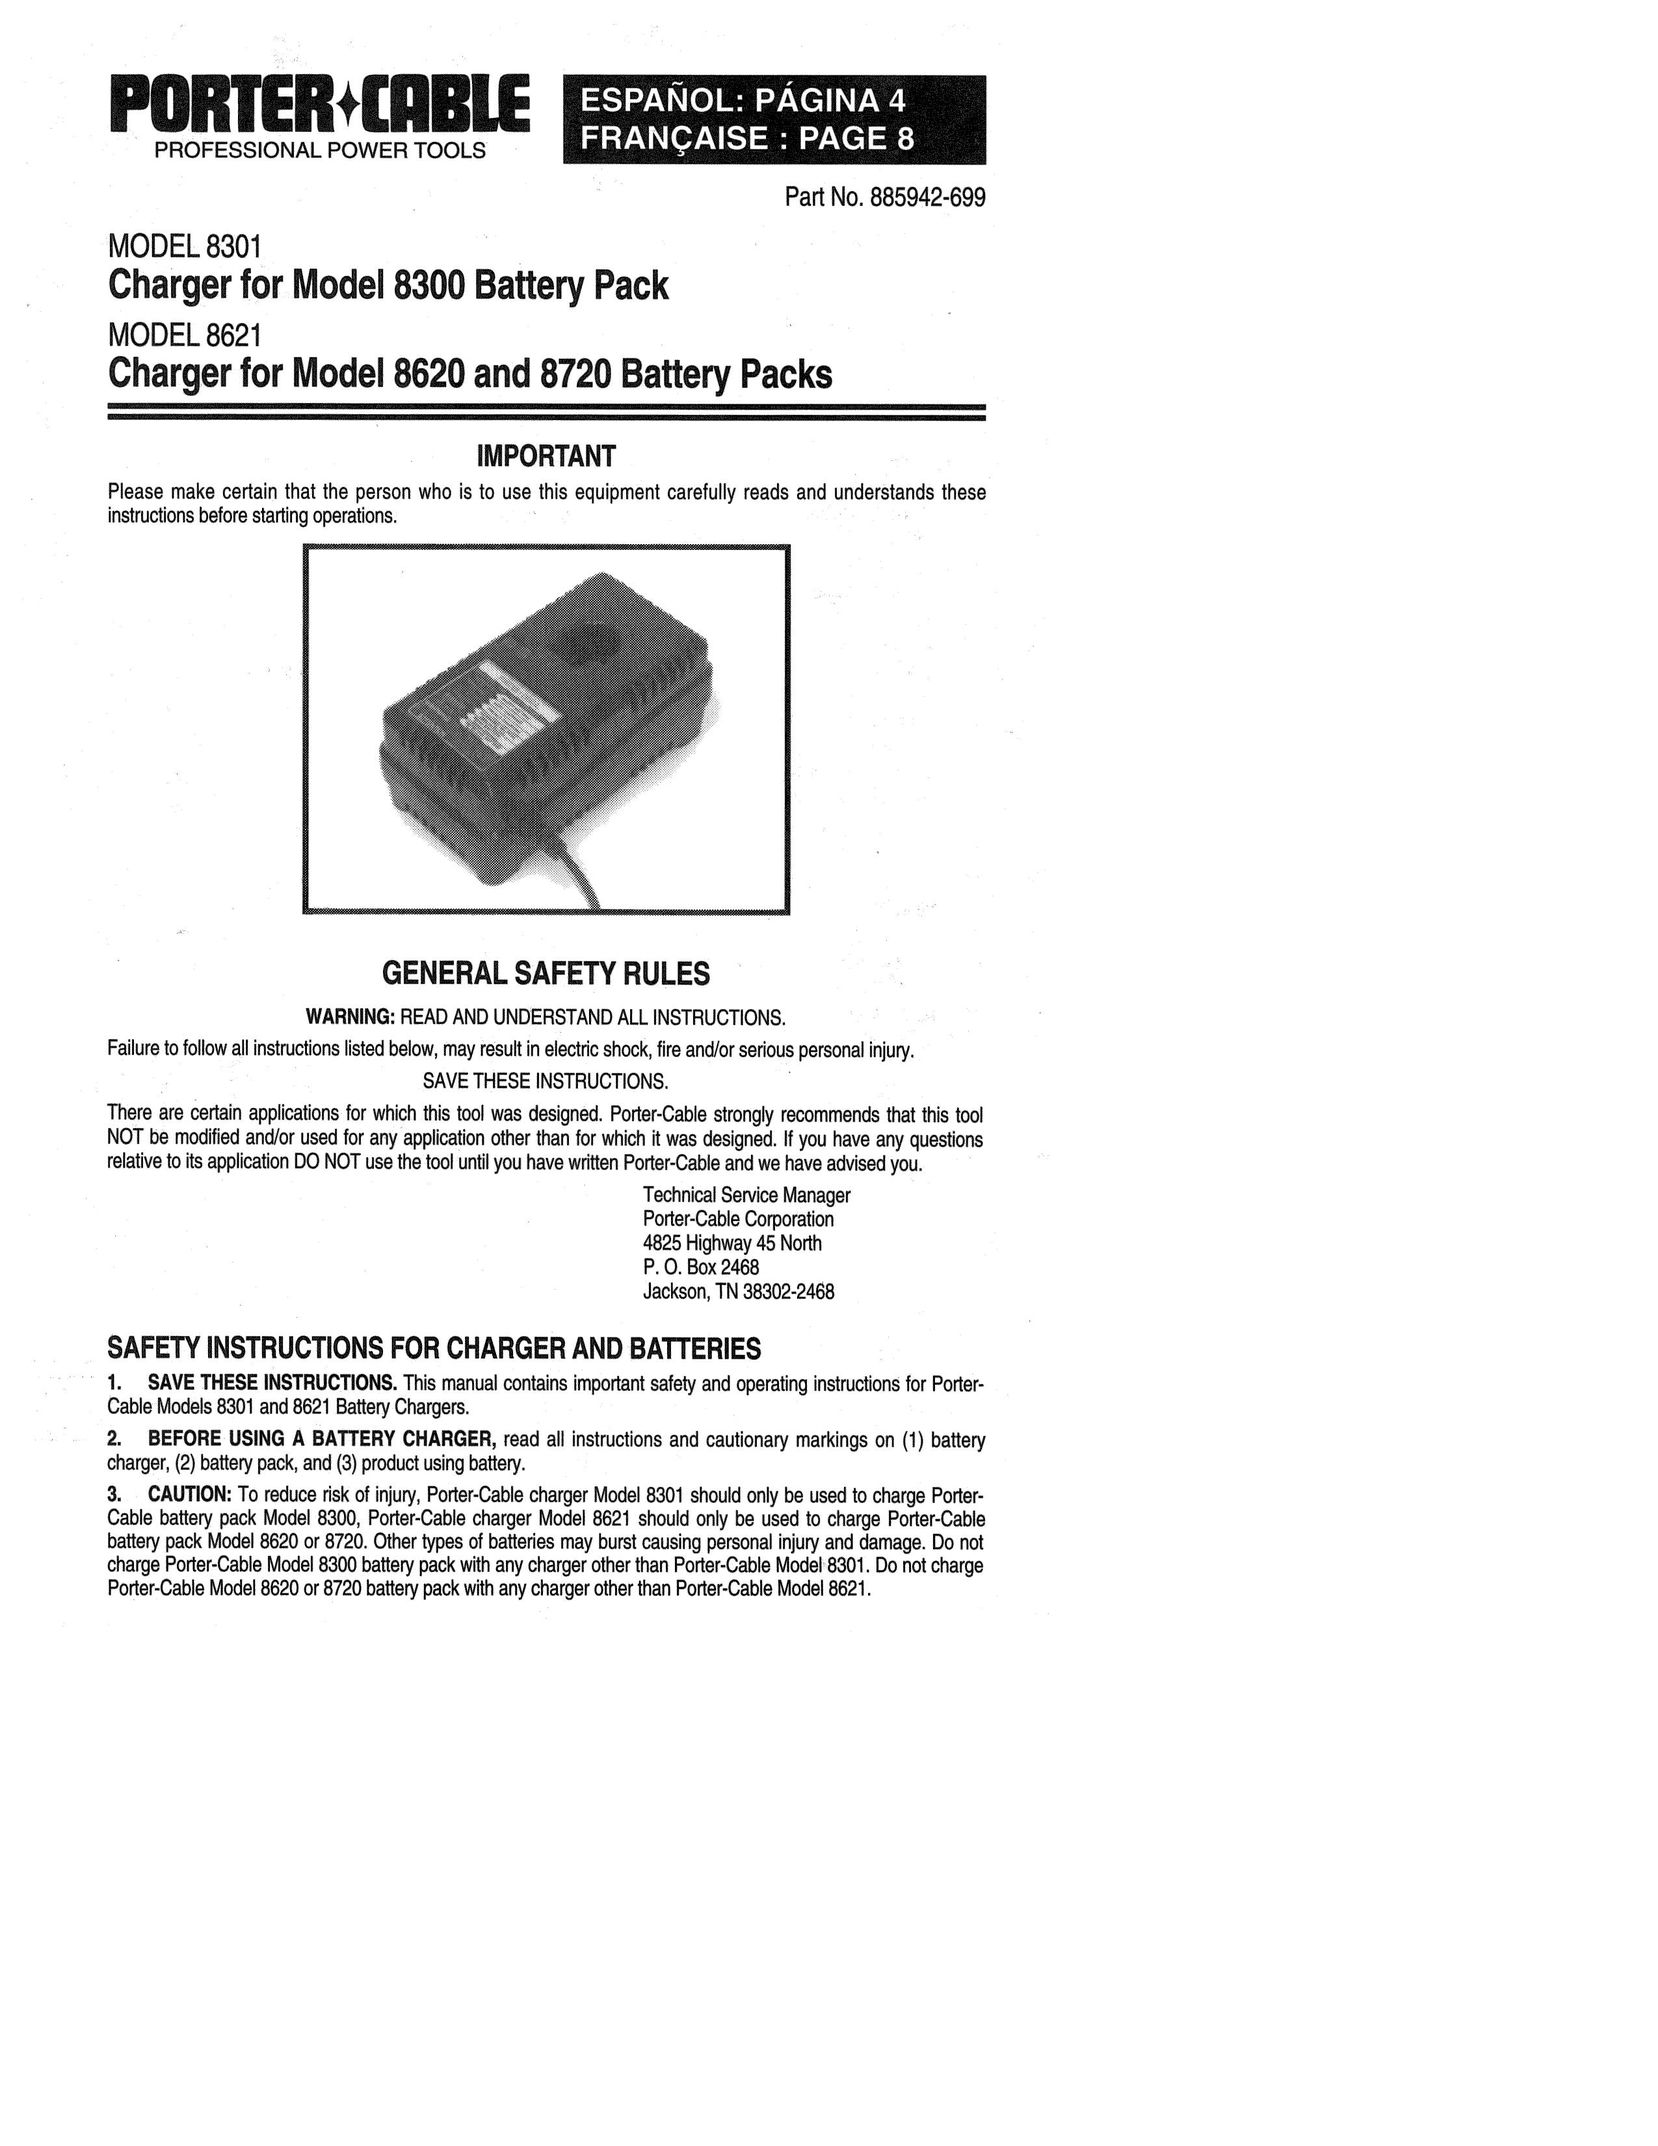 Porter-Cable 885942-699 Battery Charger User Manual